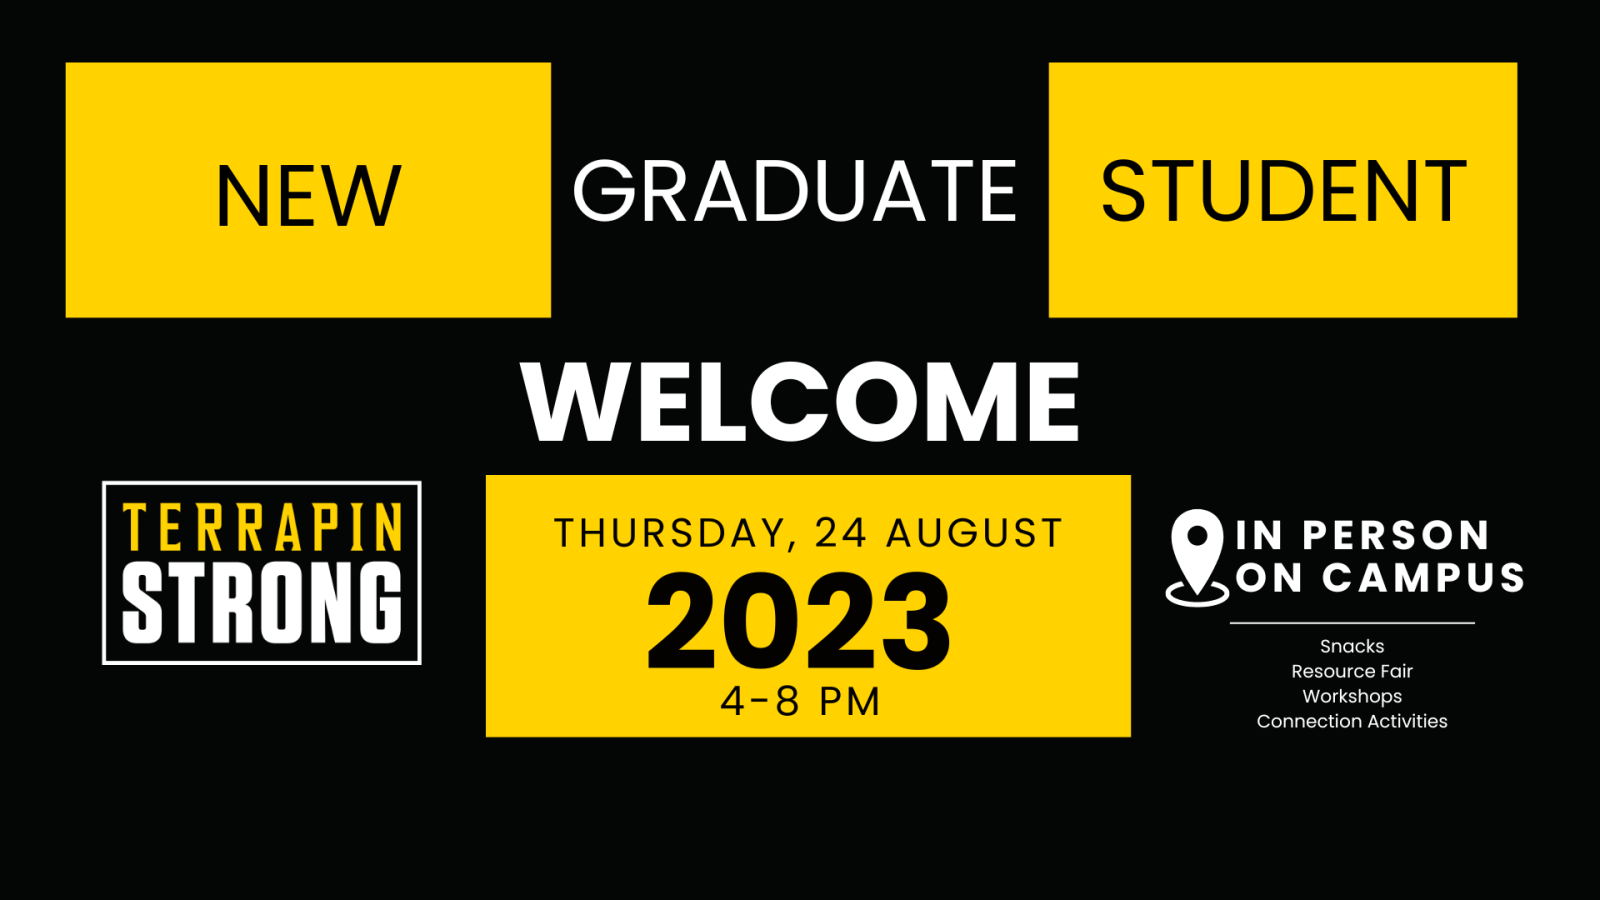 Black and yellow squares with text: New Graduate School Welcome 2023 - Thursday, 24 August from 4-8 pm